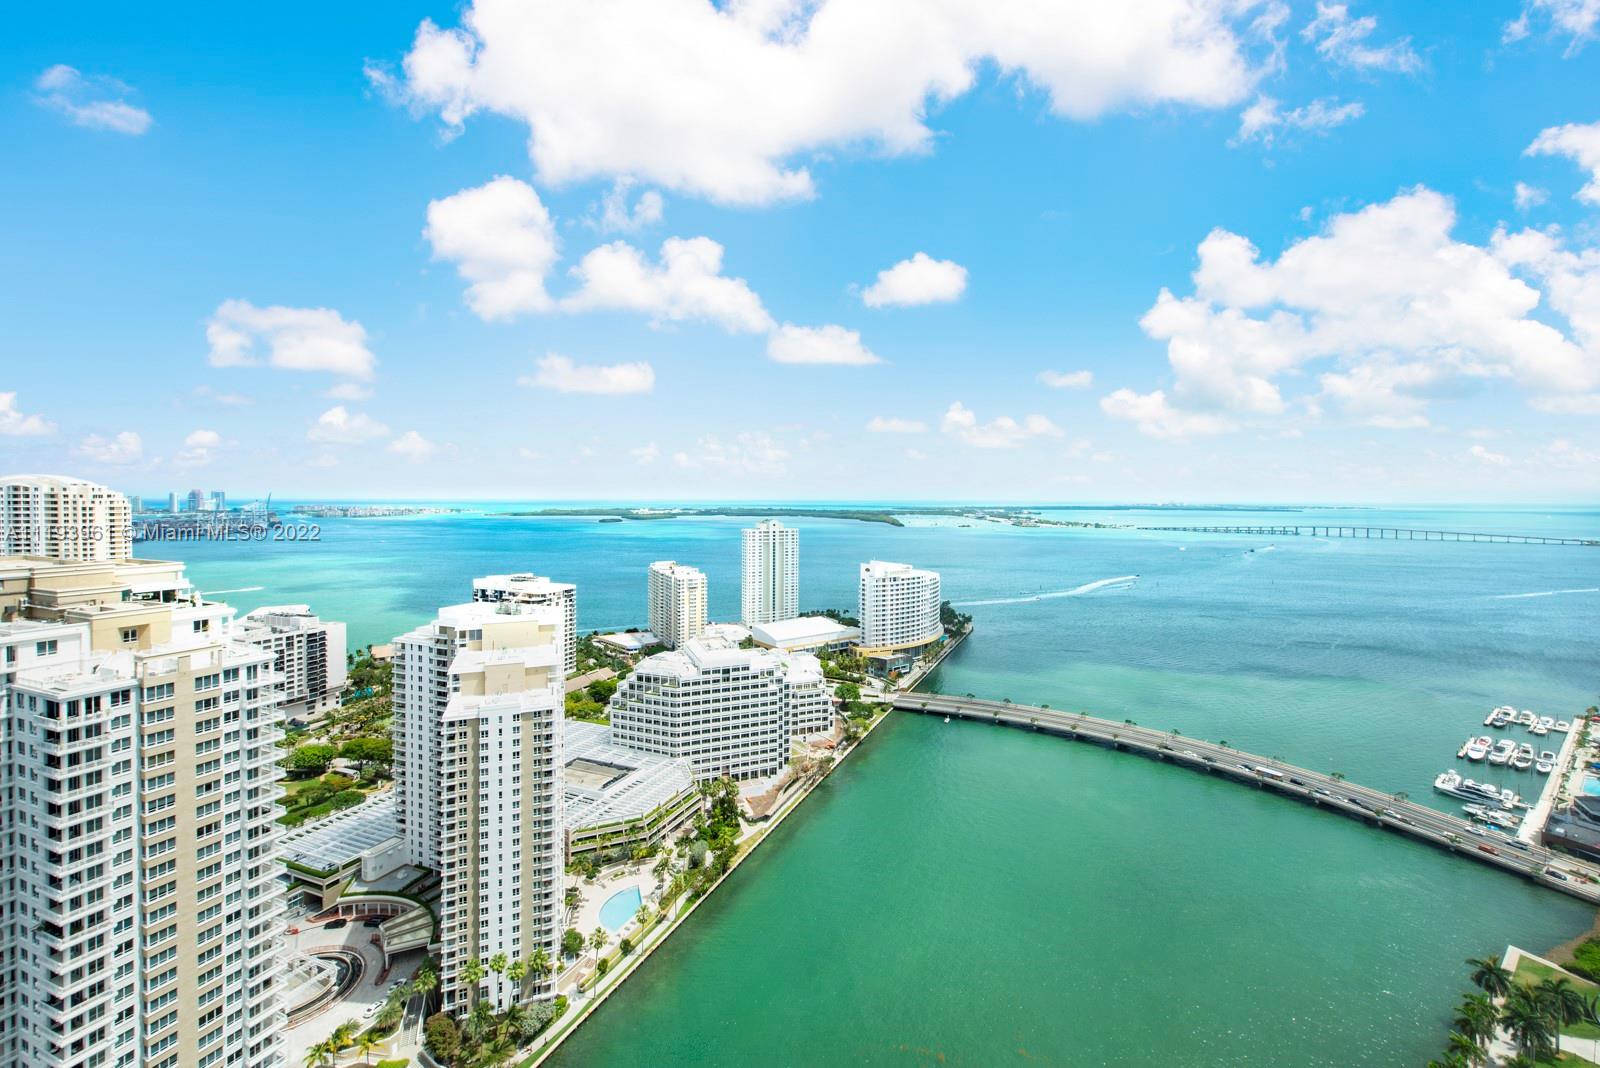 Tastefully remodeled 2BR/2BA + Den, high floor unit at the Icon Brickell. Top quality, high end finishes that compliment the views of the beautiful waters of Biscayne Bay meeting the mouth of the Miami River. Take in the pristine colored waters & impressive city skylines through the floor to ceiling impact windows with North East exposure. Includes a balcony that runs the length of the unit, electric shades, over 100 recessed, high quality lights and gorgeous chandeliers. Top of the line appliances with an open kitchen layout overlooking the living area. Lovely Marble throughout, including bathrooms that will make getting ready for a night out on town a pleasure. Large walk in closets built out for efficiency, there is too much to list. I didn't even mention the amazing amenities of Icon!